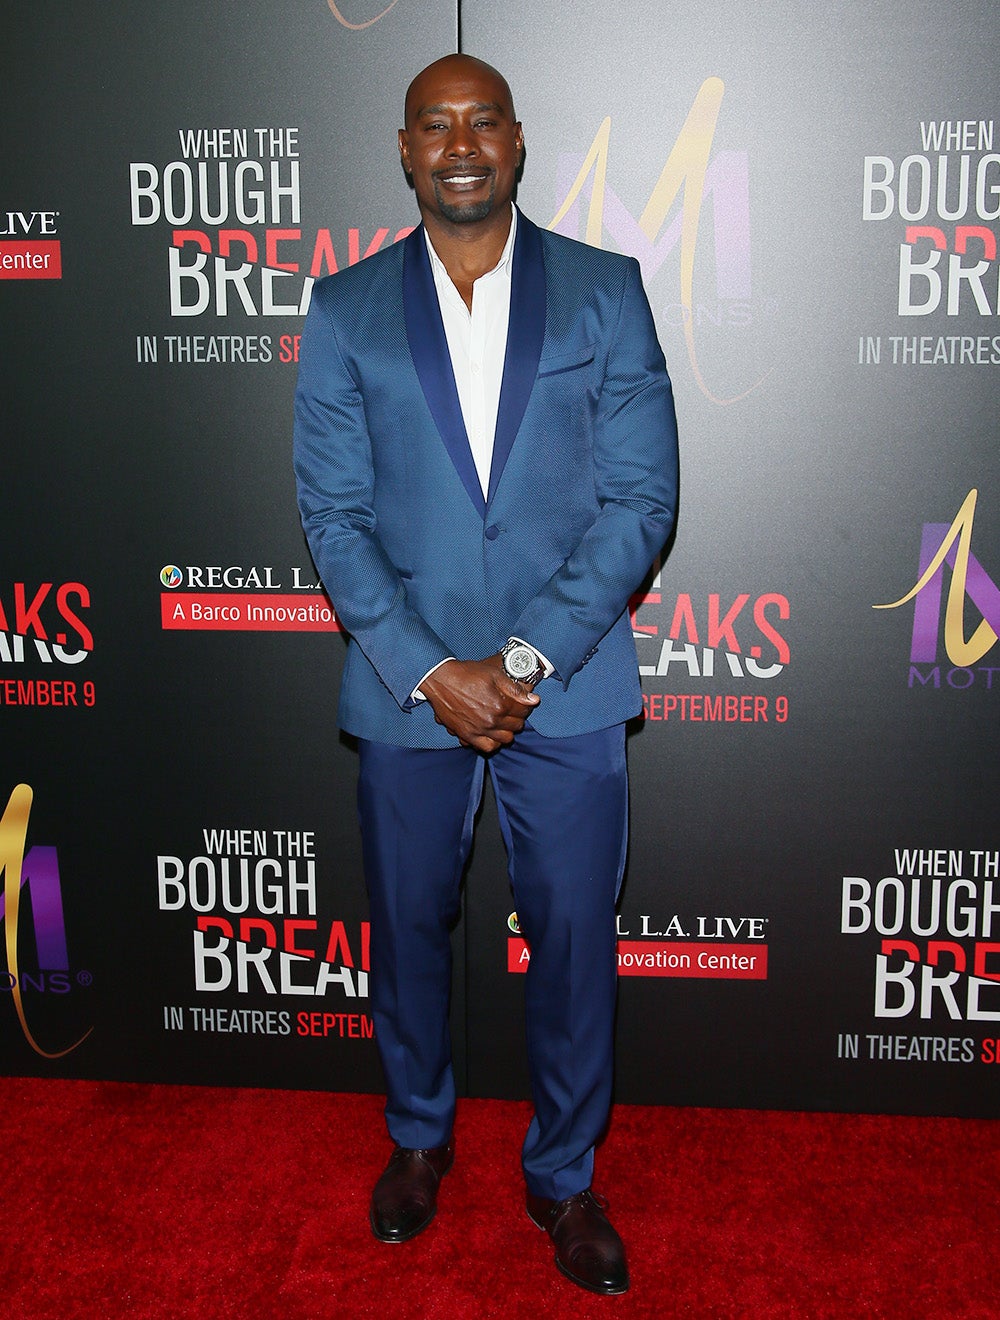 Celebs Came Through For The 'When The Bough Breaks' Premiere
